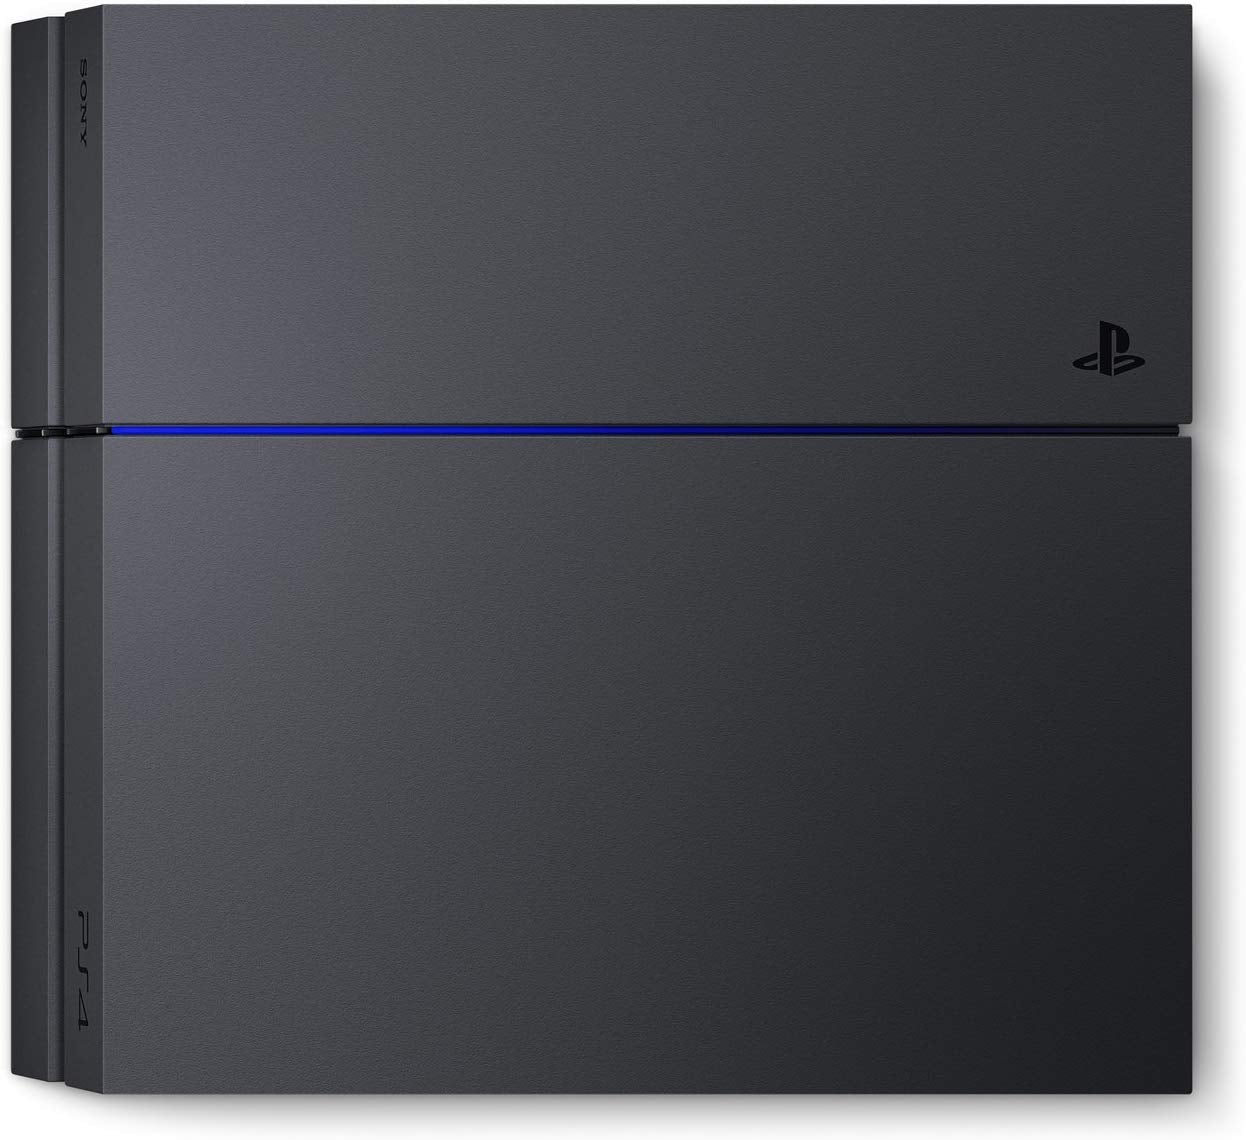 SONY PlayStation 4 500GB Console (Black) - (PS4) PlayStation 4 [Pre-Owned] Consoles Sony   